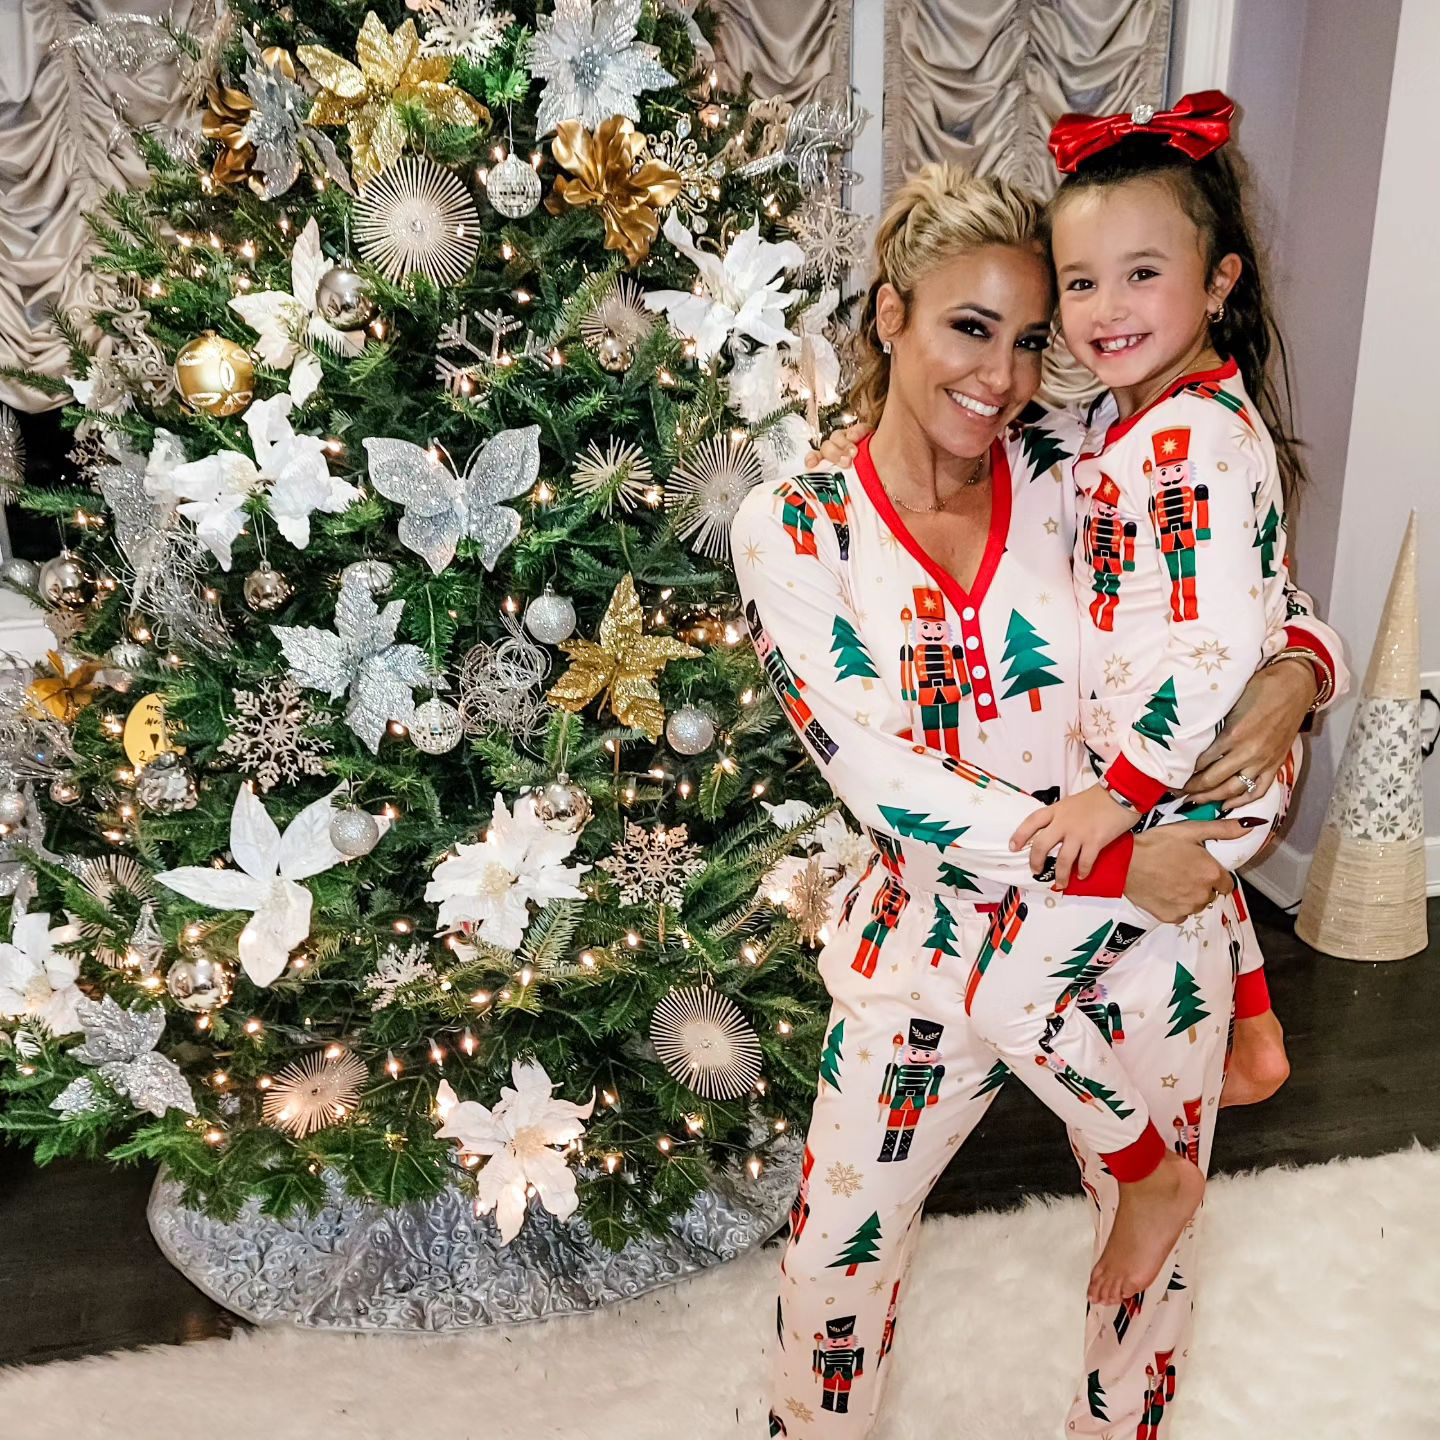 Danielle posed in front of her shiny tree with her daughter wearing matching PJs